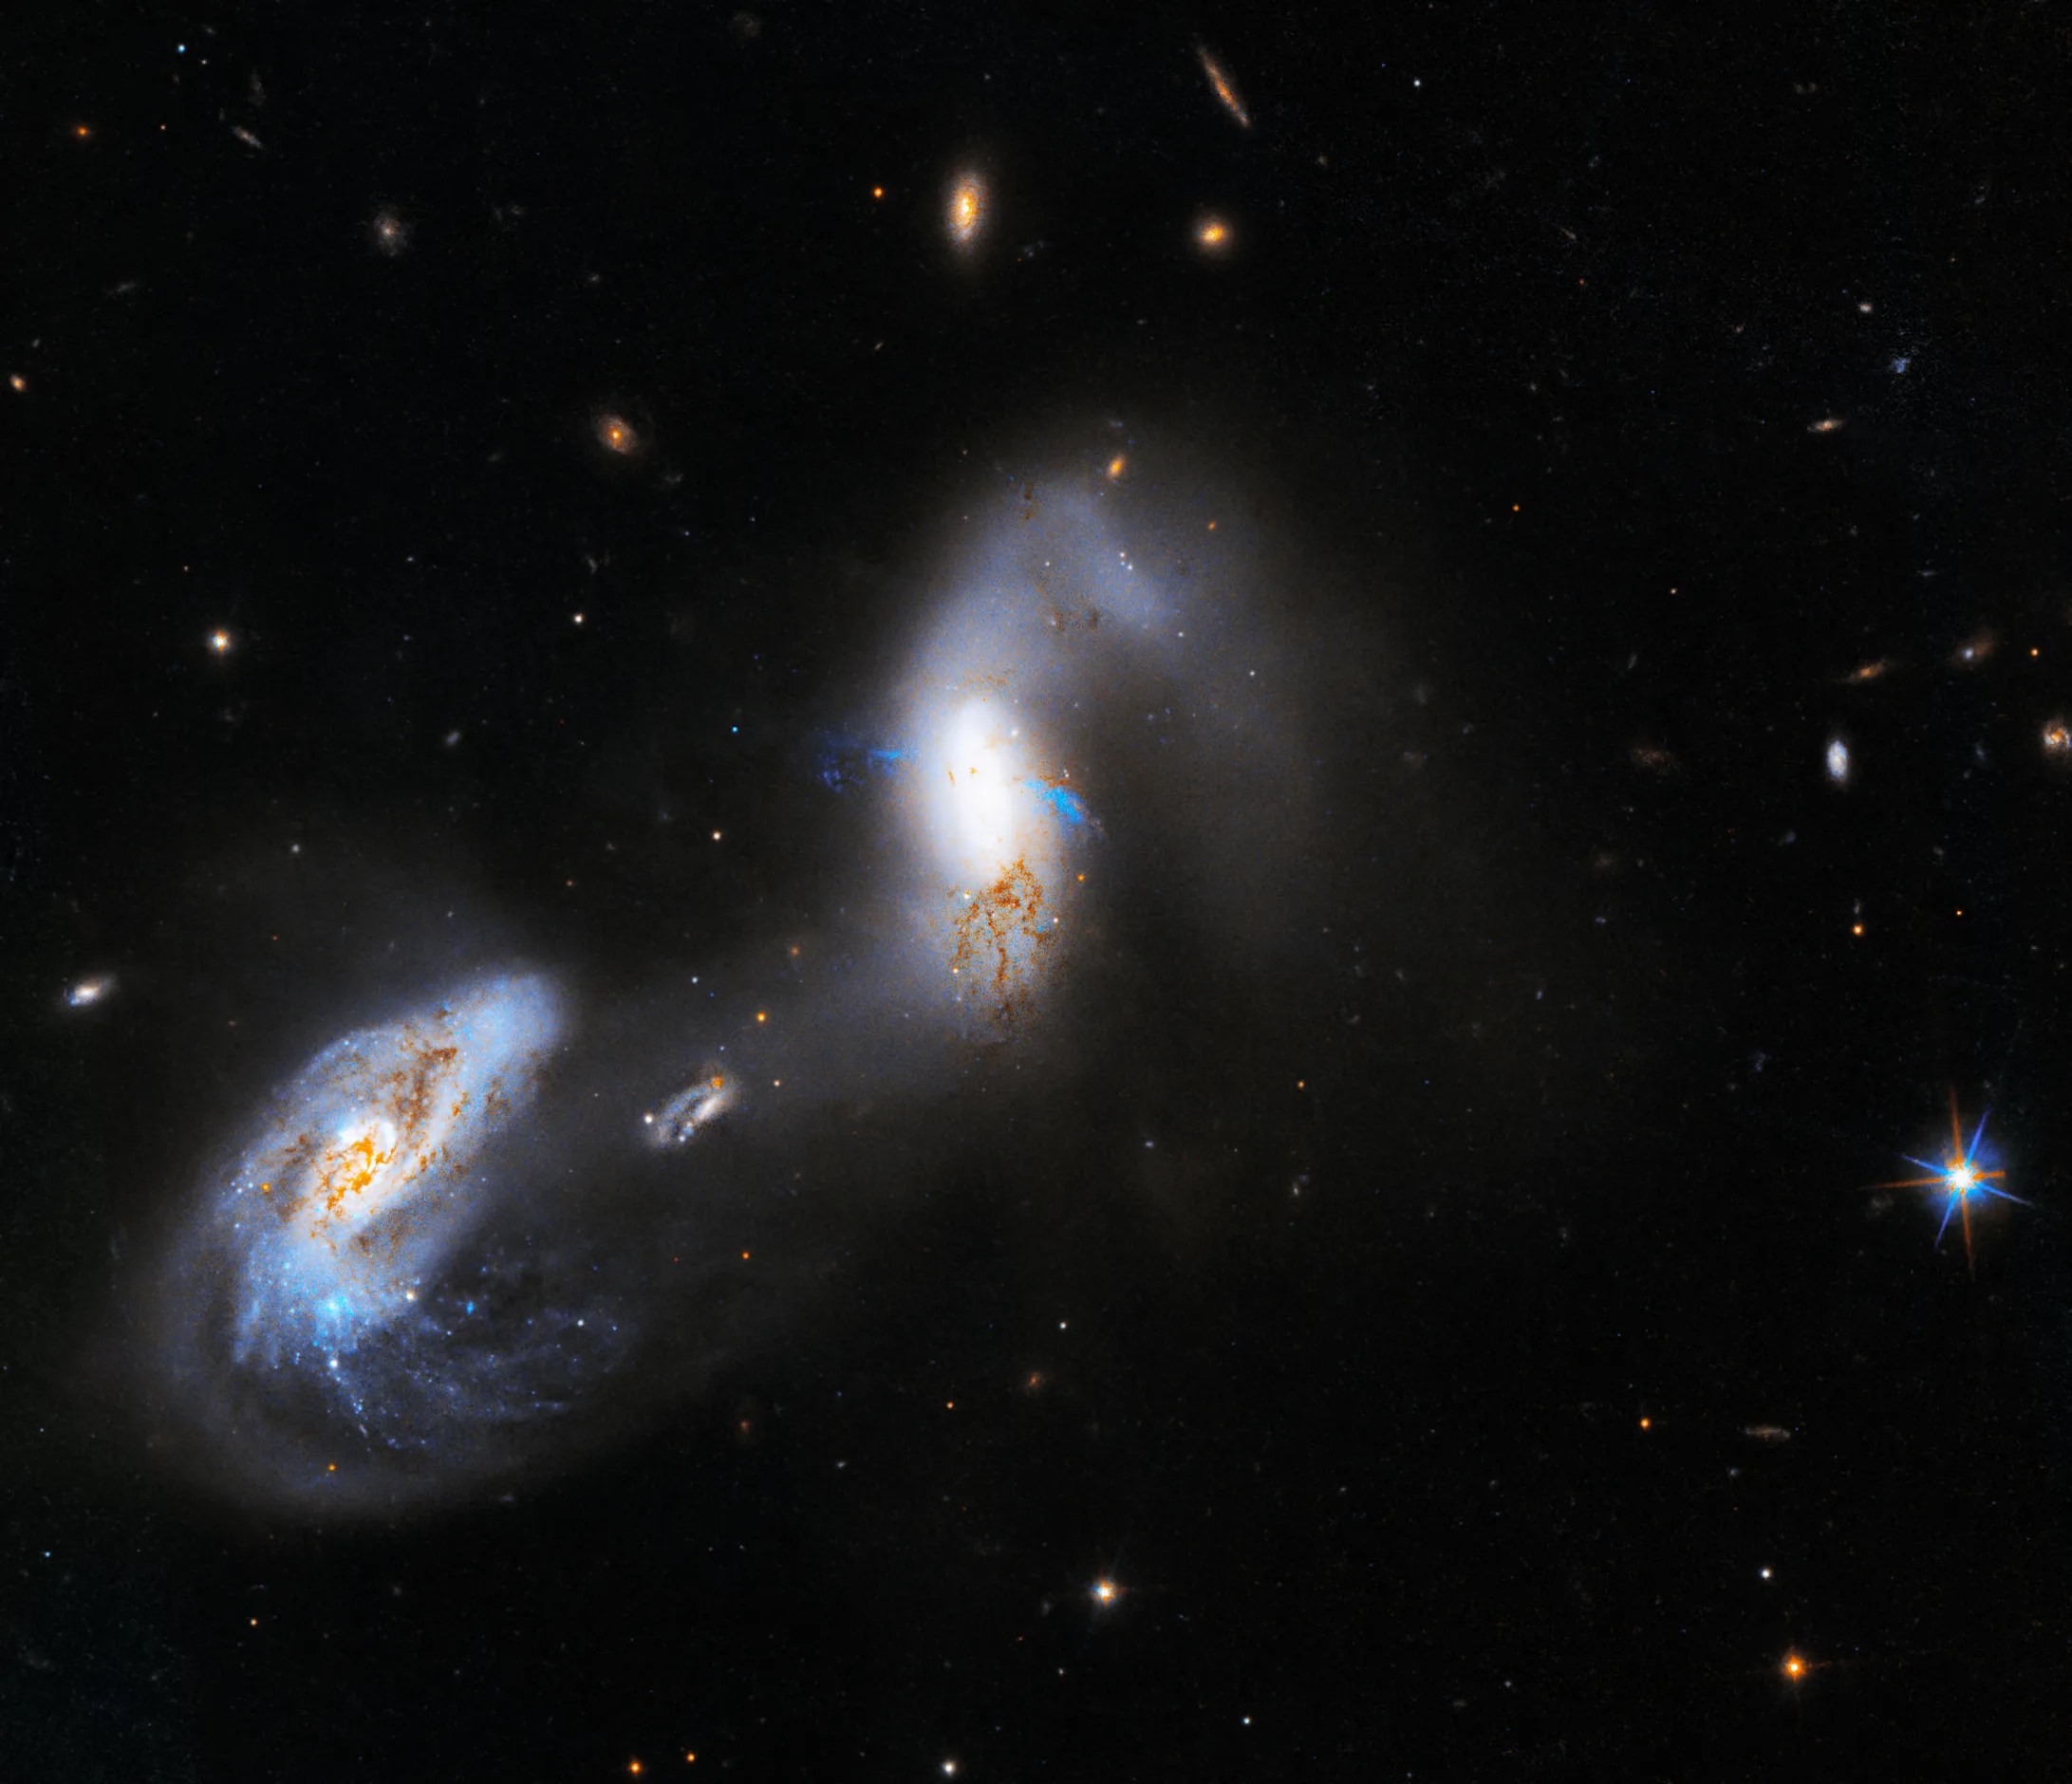 Two blue-white, comma-shaped galaxies: at upper-right and lower-left of center. Streams of diffuse gas stretch between them. Areas of reddish-brown dust dot galaxy at left, less so on galaxy at right. Black background dotted with stars, distant galaxies.